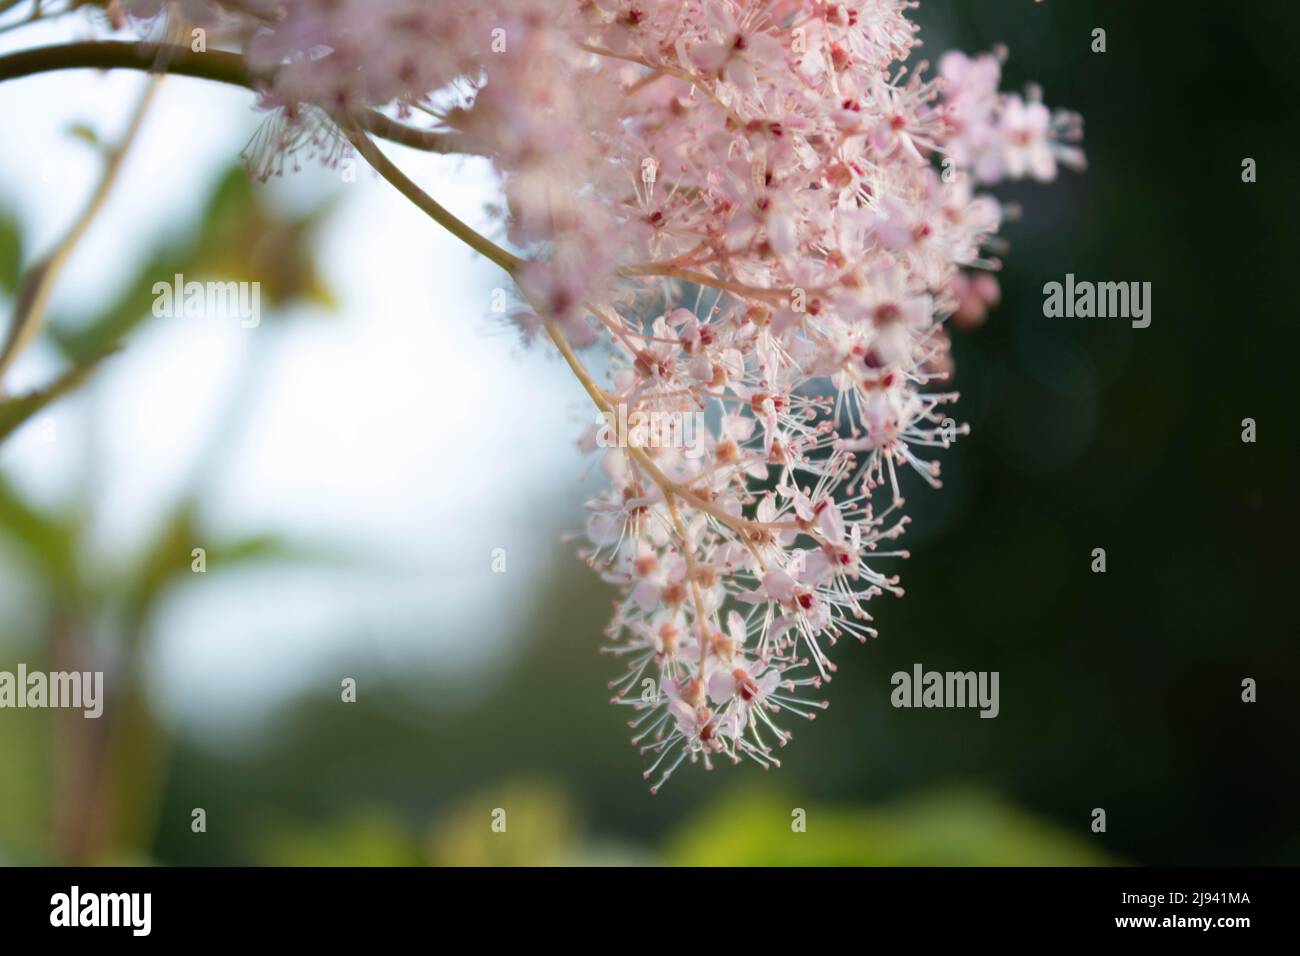 Pink flowering French tamarisk blossoms (Tamarix gallica) against green background, close up. Ornamental flower in the garden Stock Photo